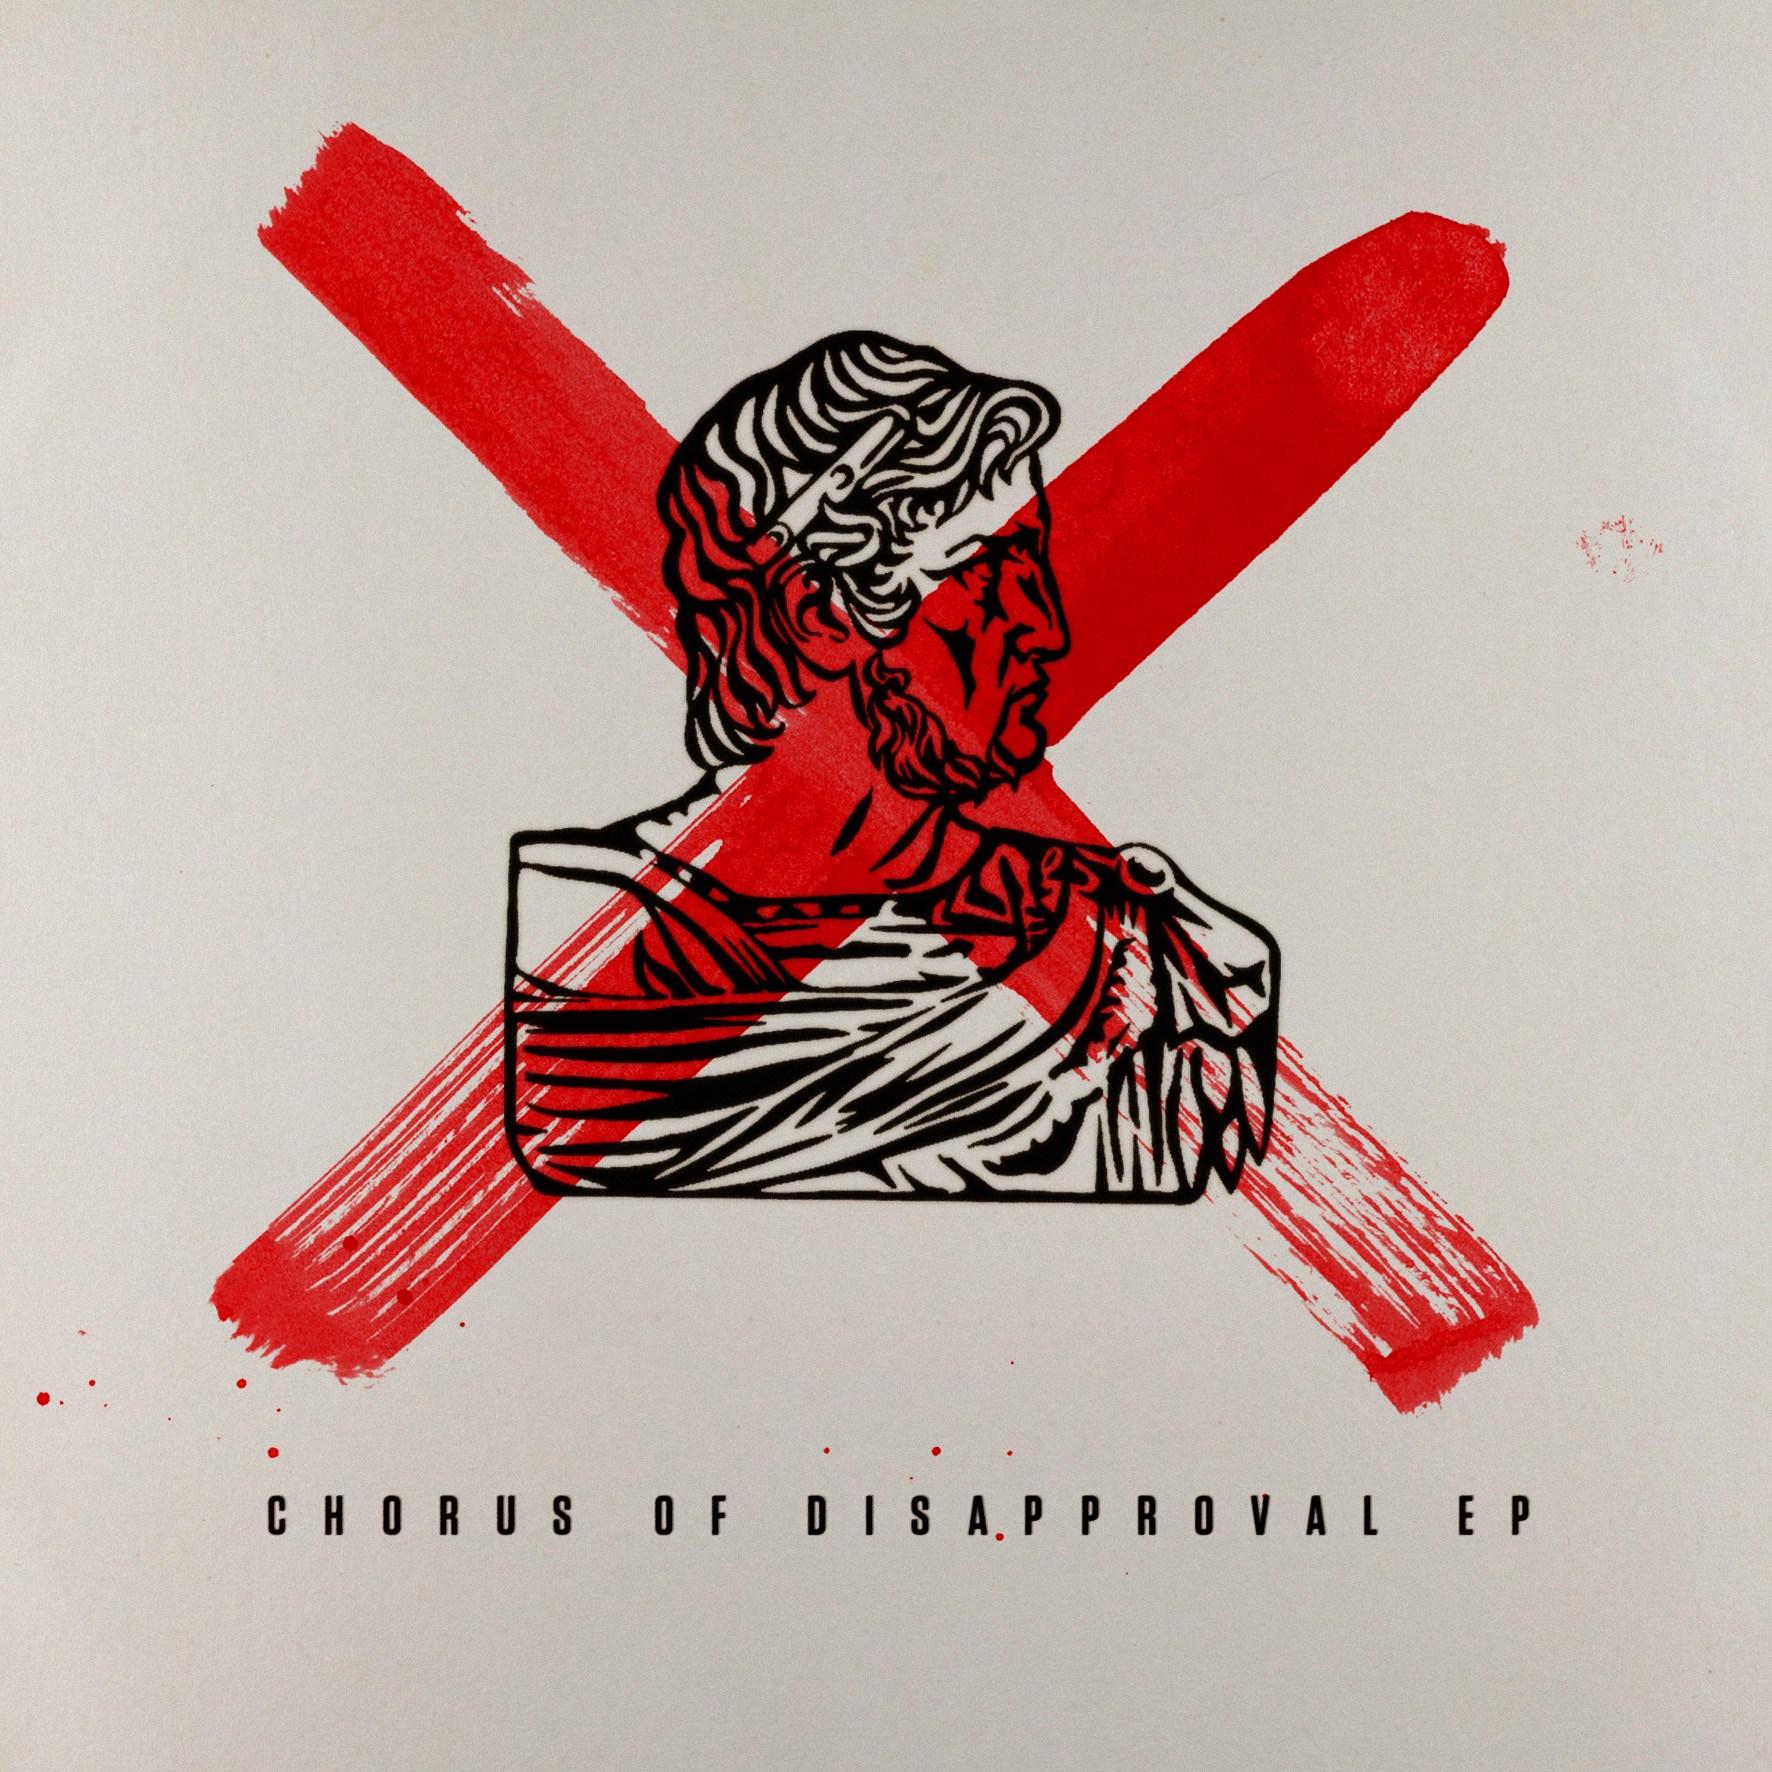 Rockwell/CHORUS OF DISAPPROVAL EP 12"